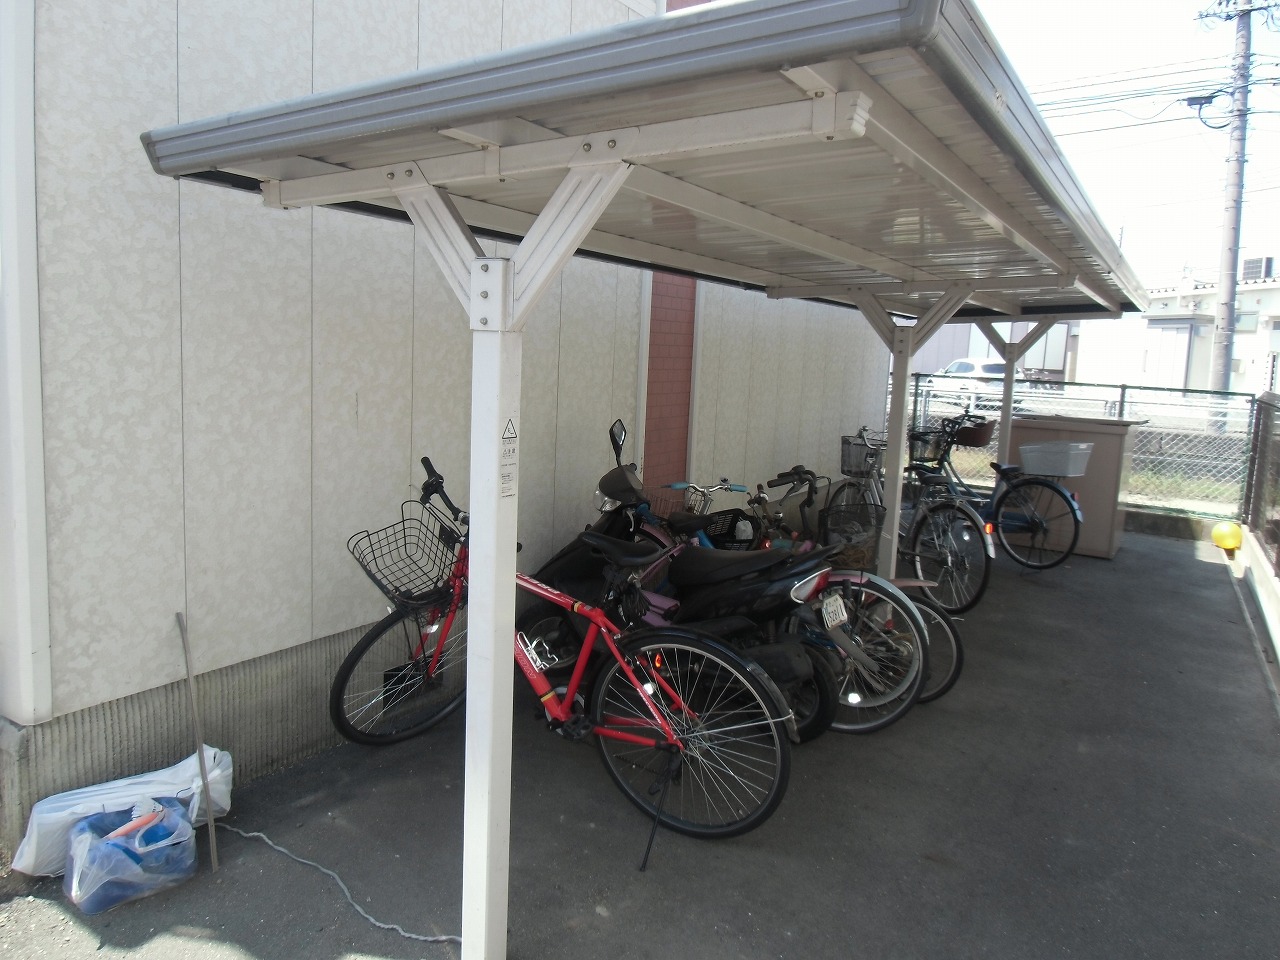 Other common areas. Covered bicycle parking stations